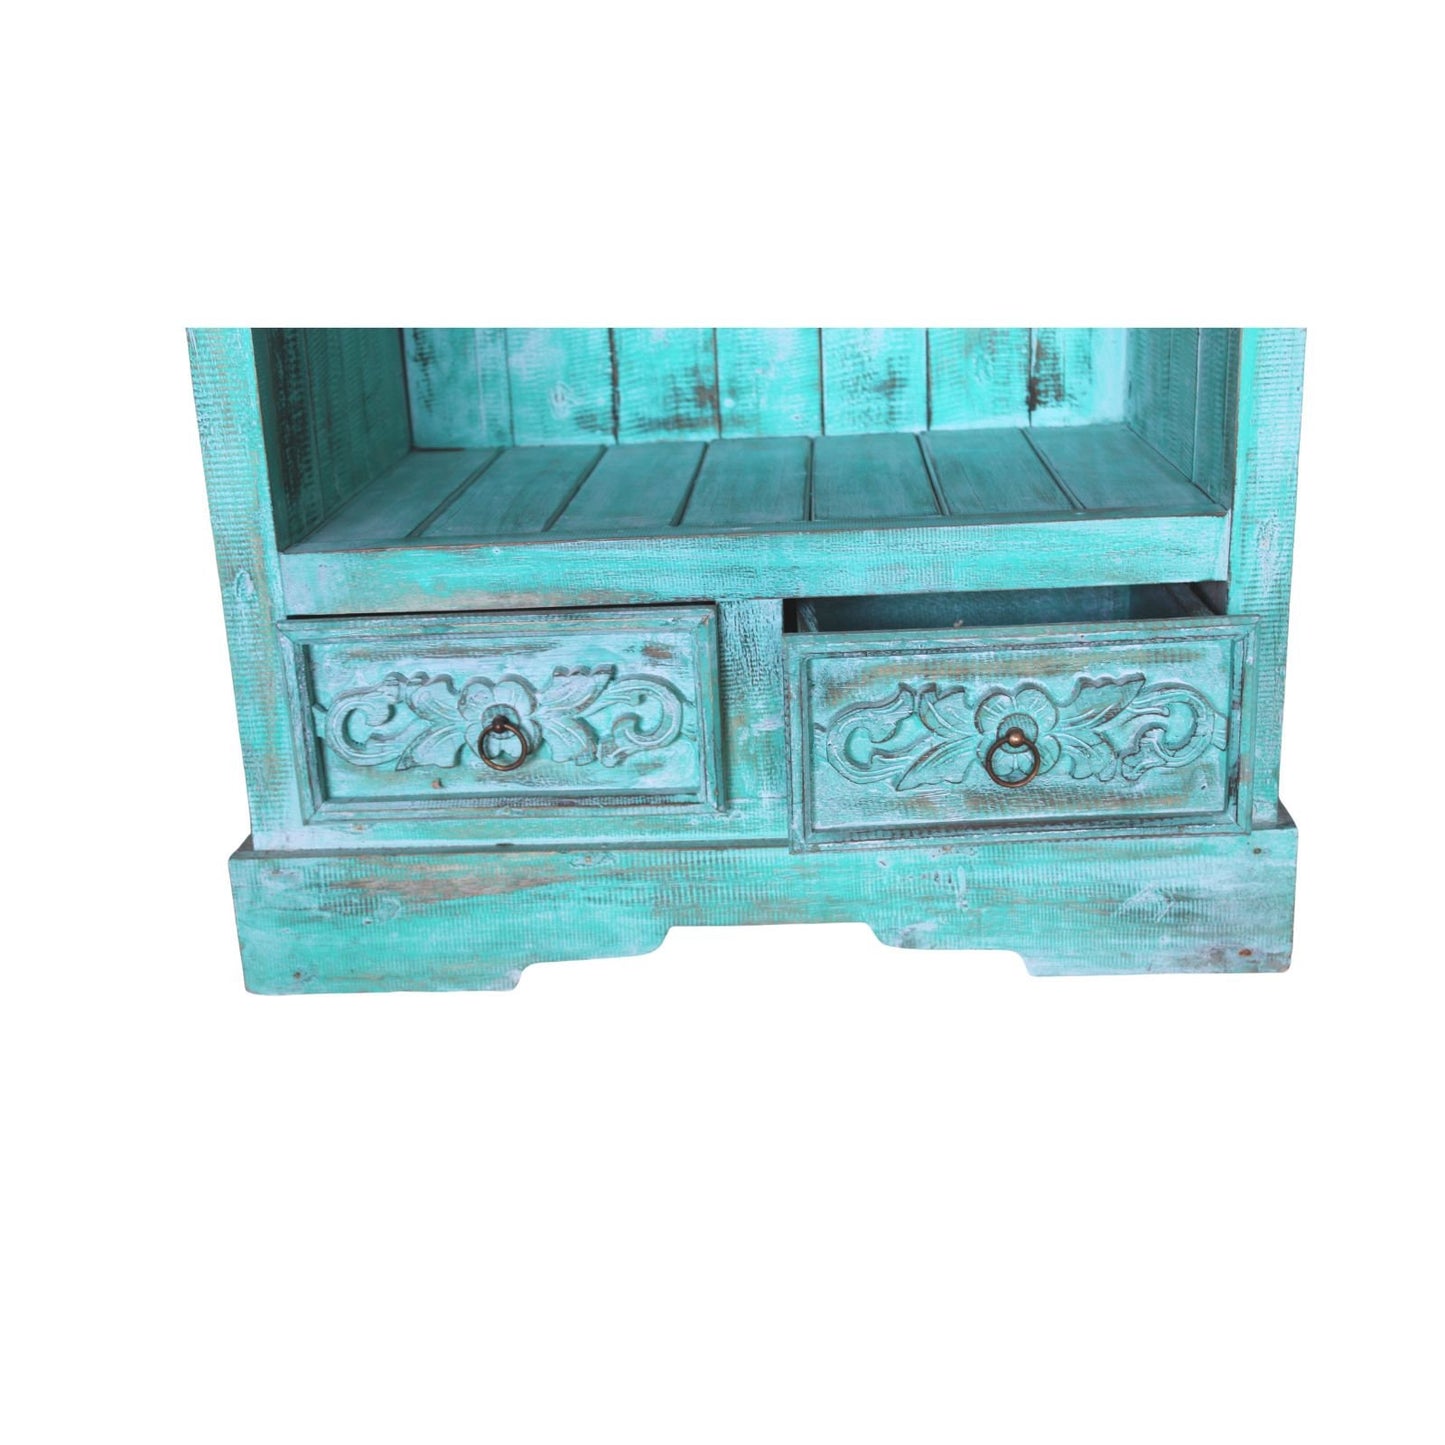 Albasia Bathroom Cabinets-Turquoise hand carved, exquisite detailing--Dimensions: H - 120cm; W - 66.7cm; D - 40cm. Wonkey Donkey Bazaar